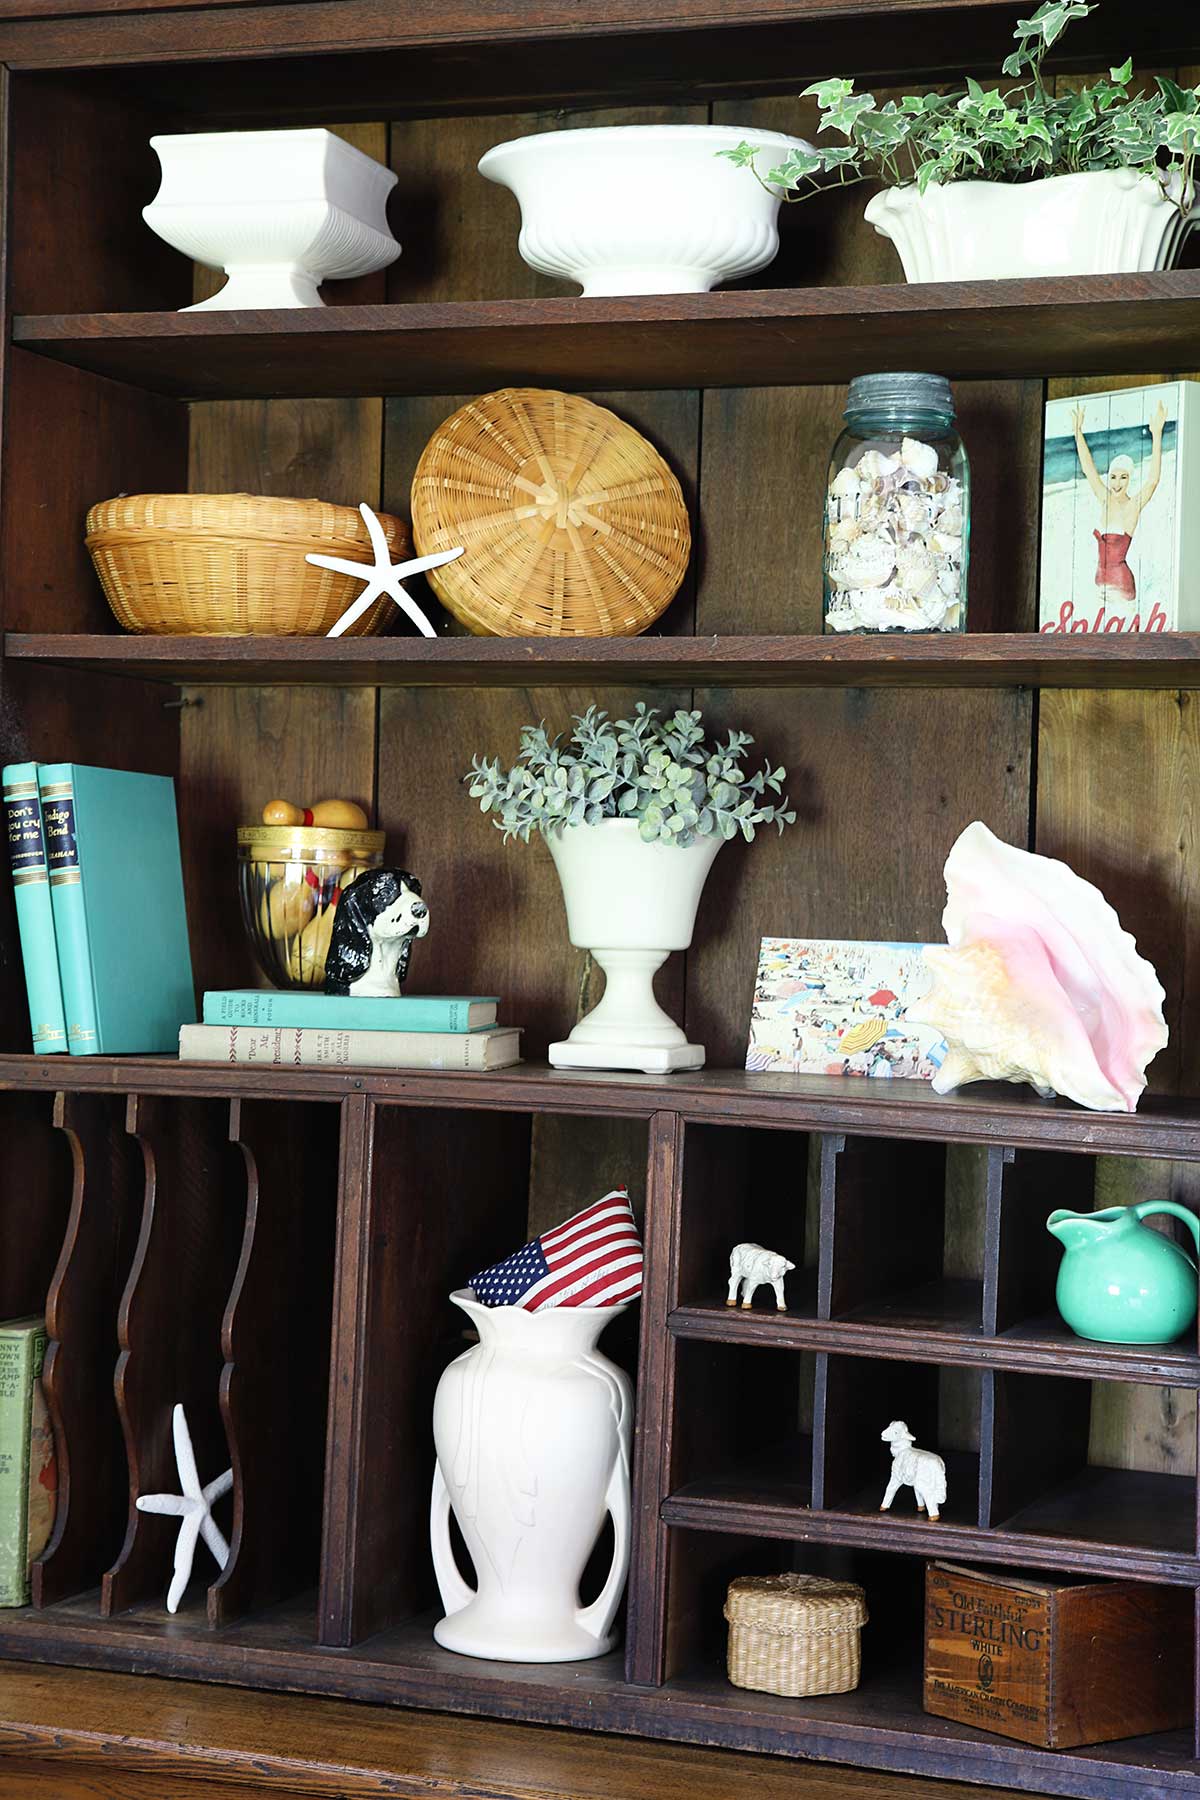 bookcase shelves decorated for summer with shells and beach theme